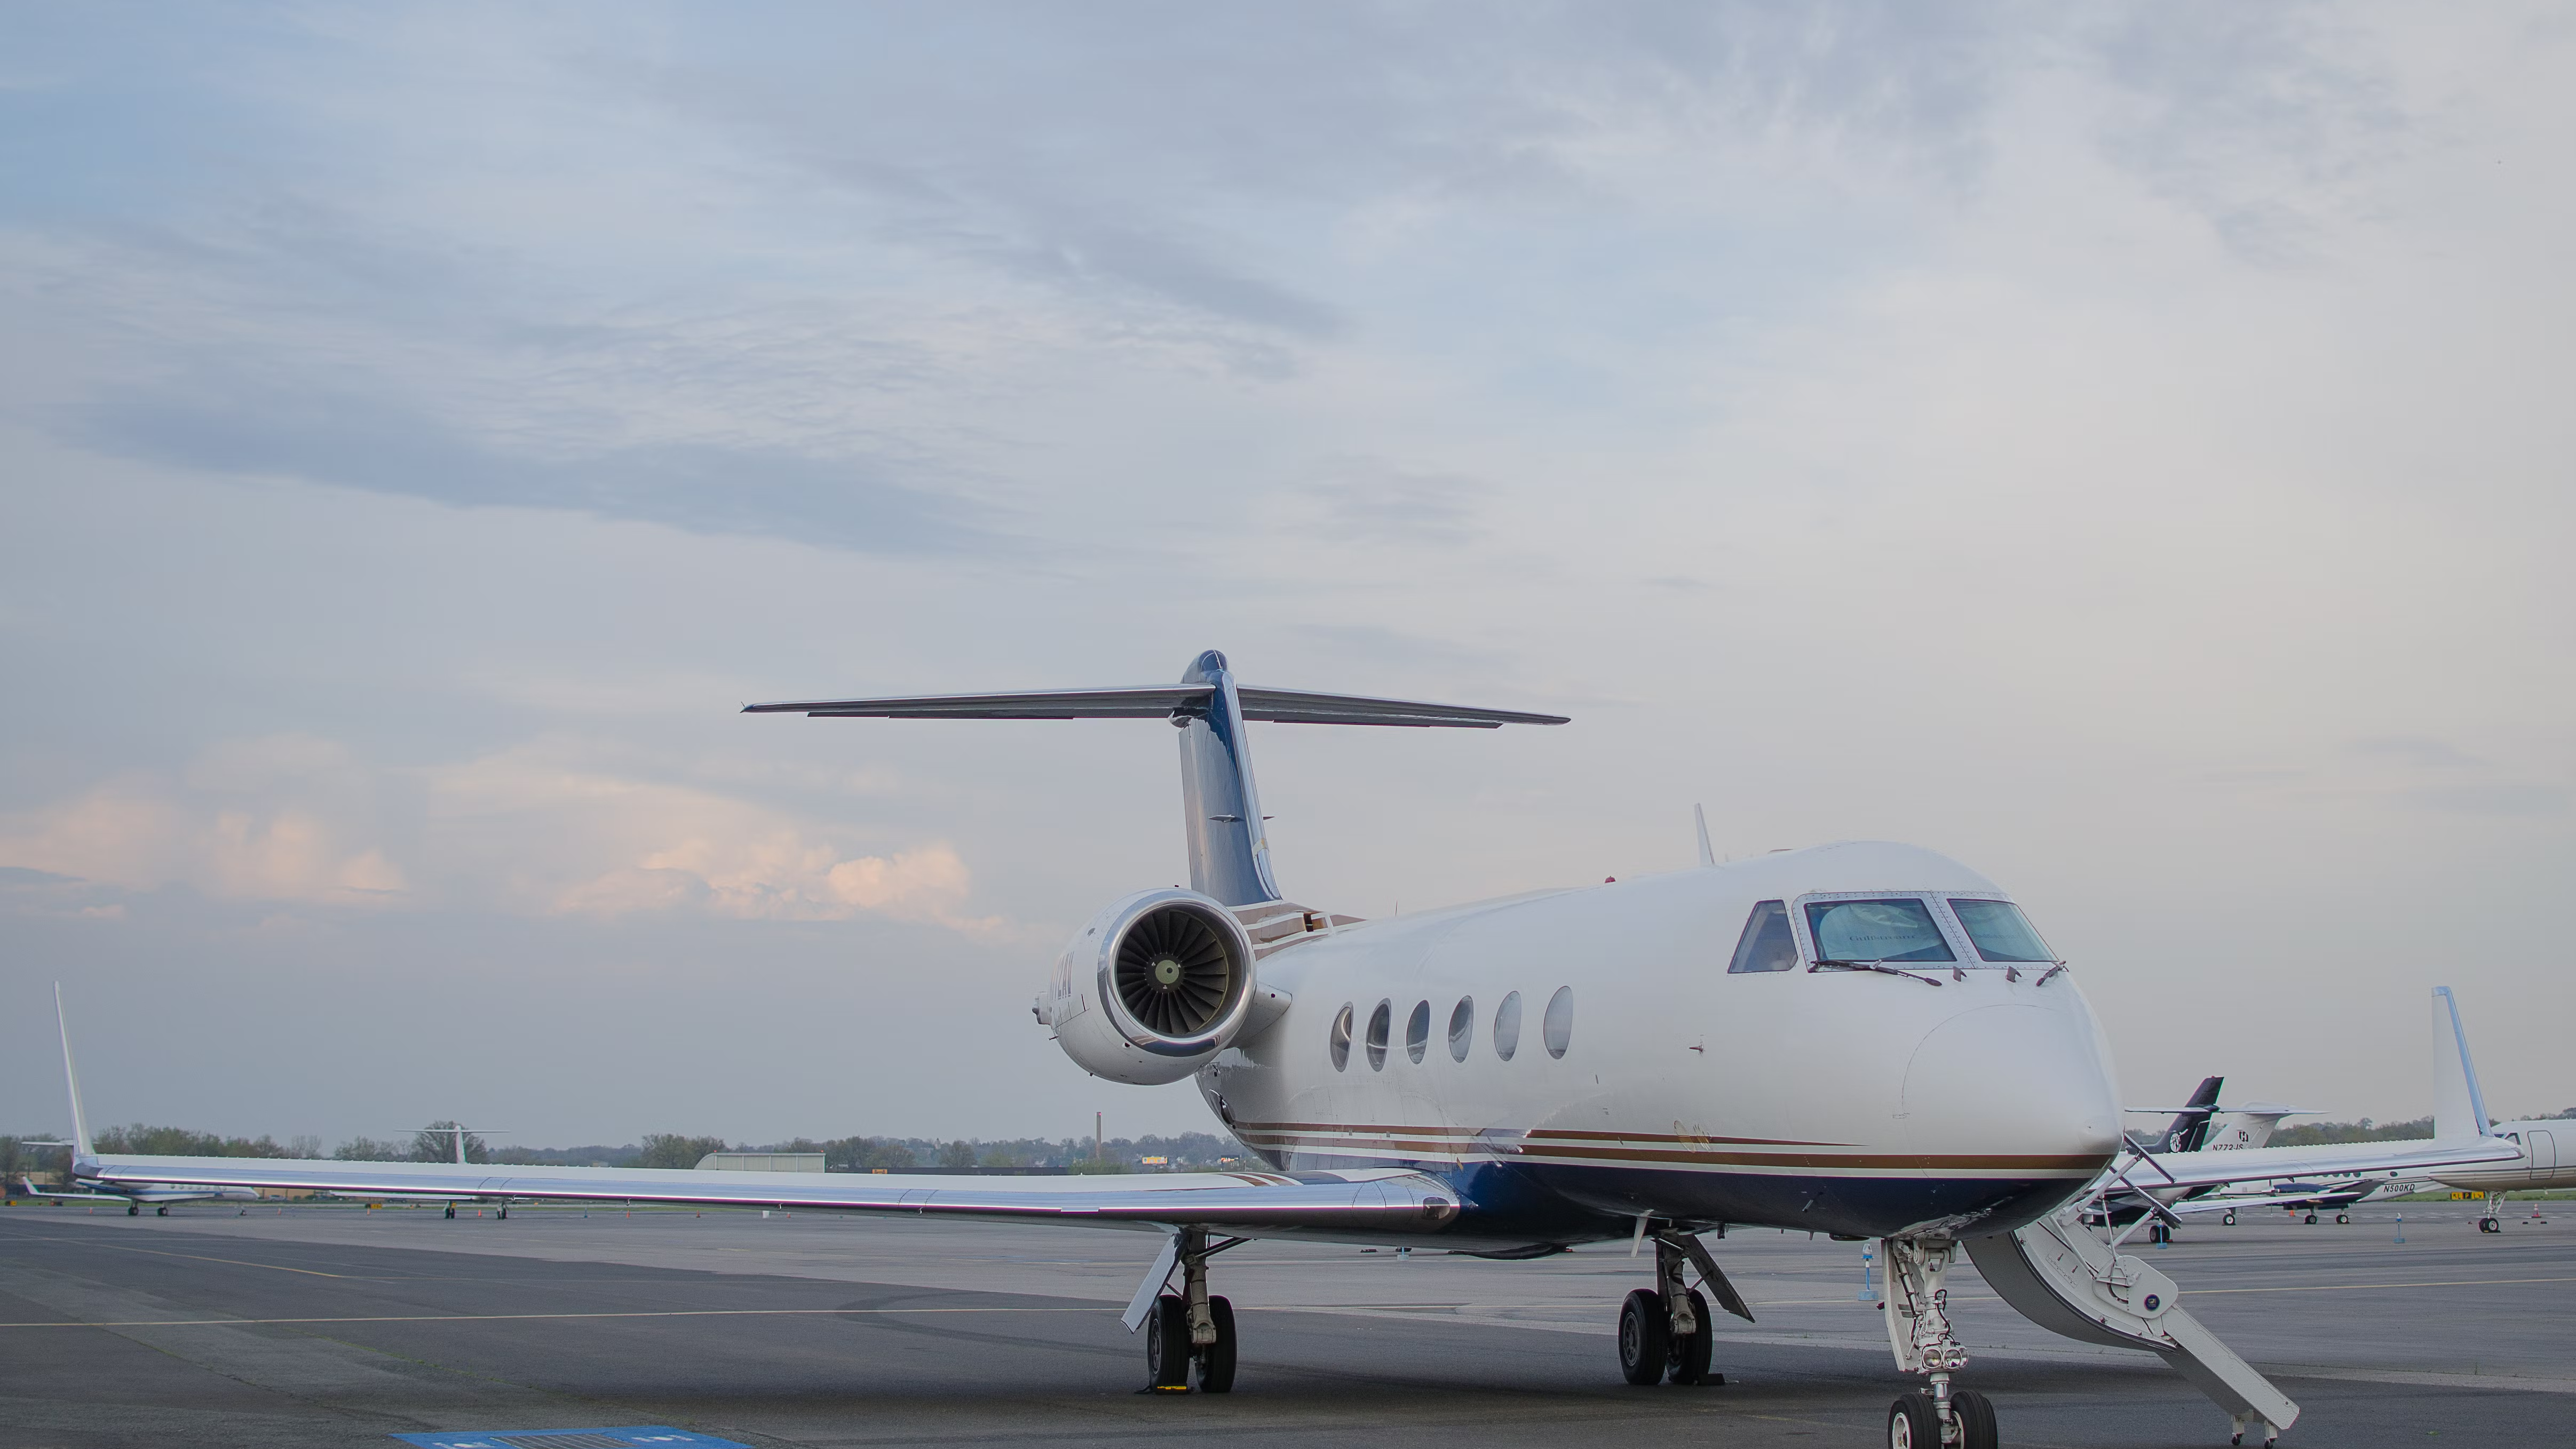 A Business Jet parked at Teterboro Airport.